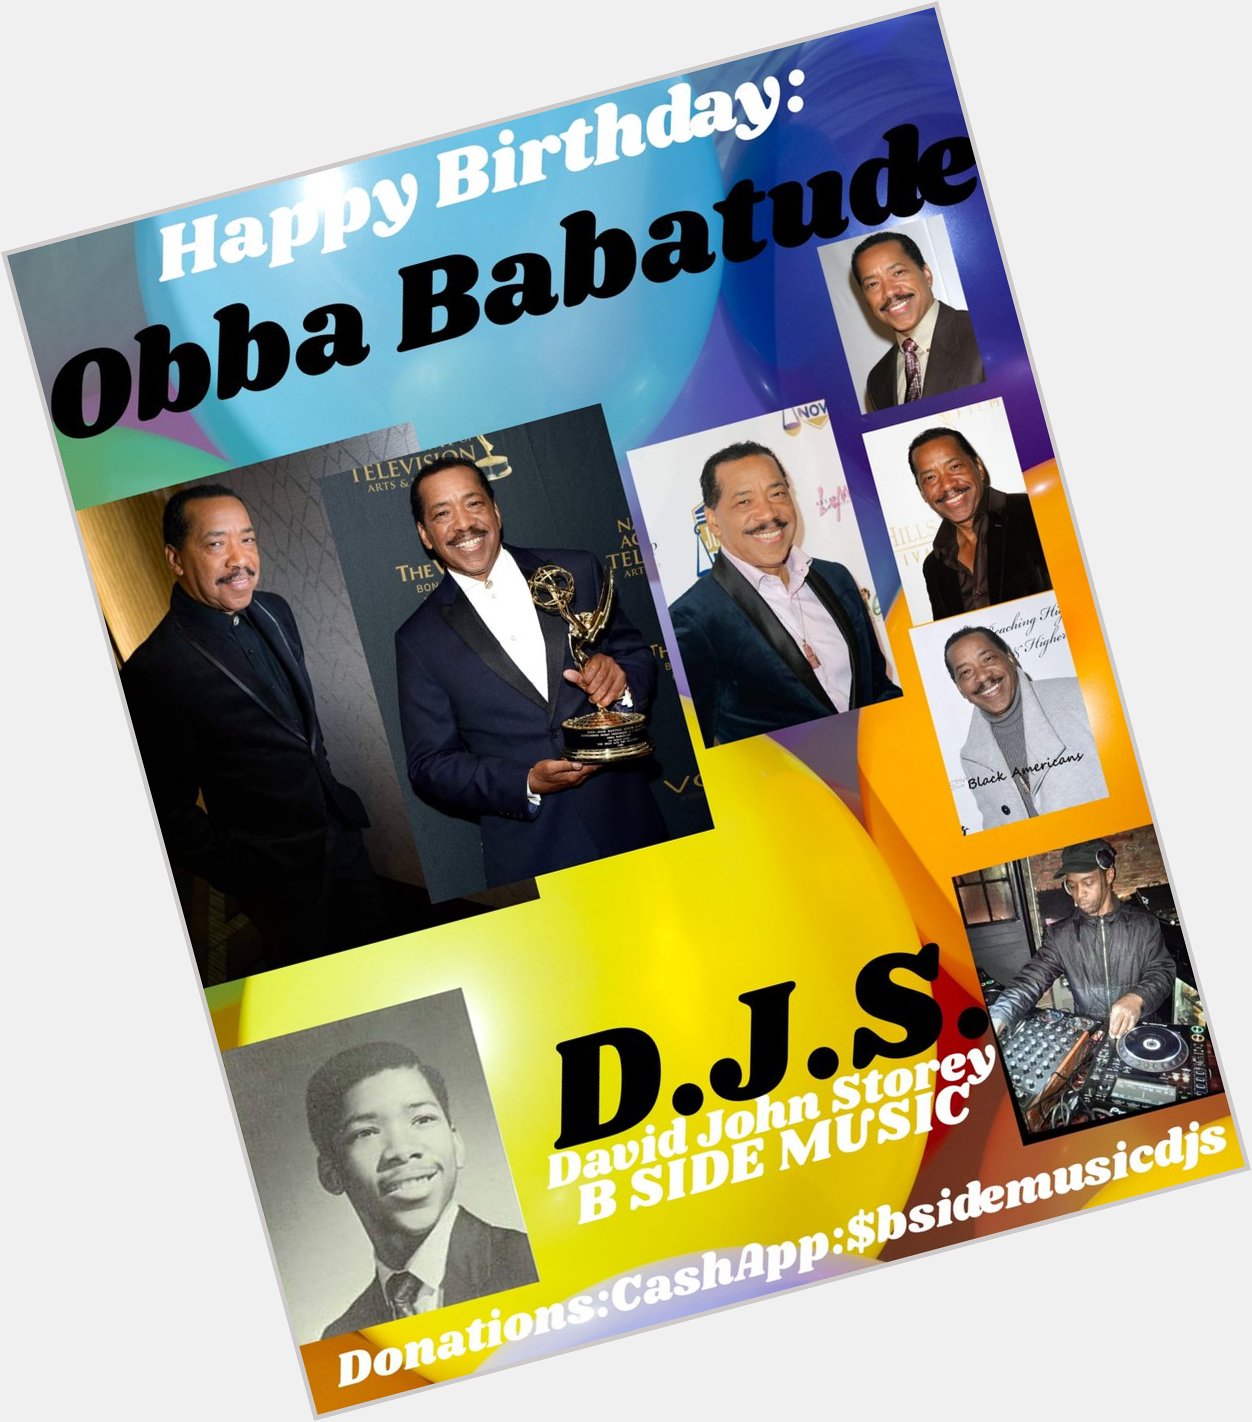 I(D.J.S.)\"B SIDE\" saying Happy Birthday to Actor: \"OBBA BABATUNDE\"!!!! 